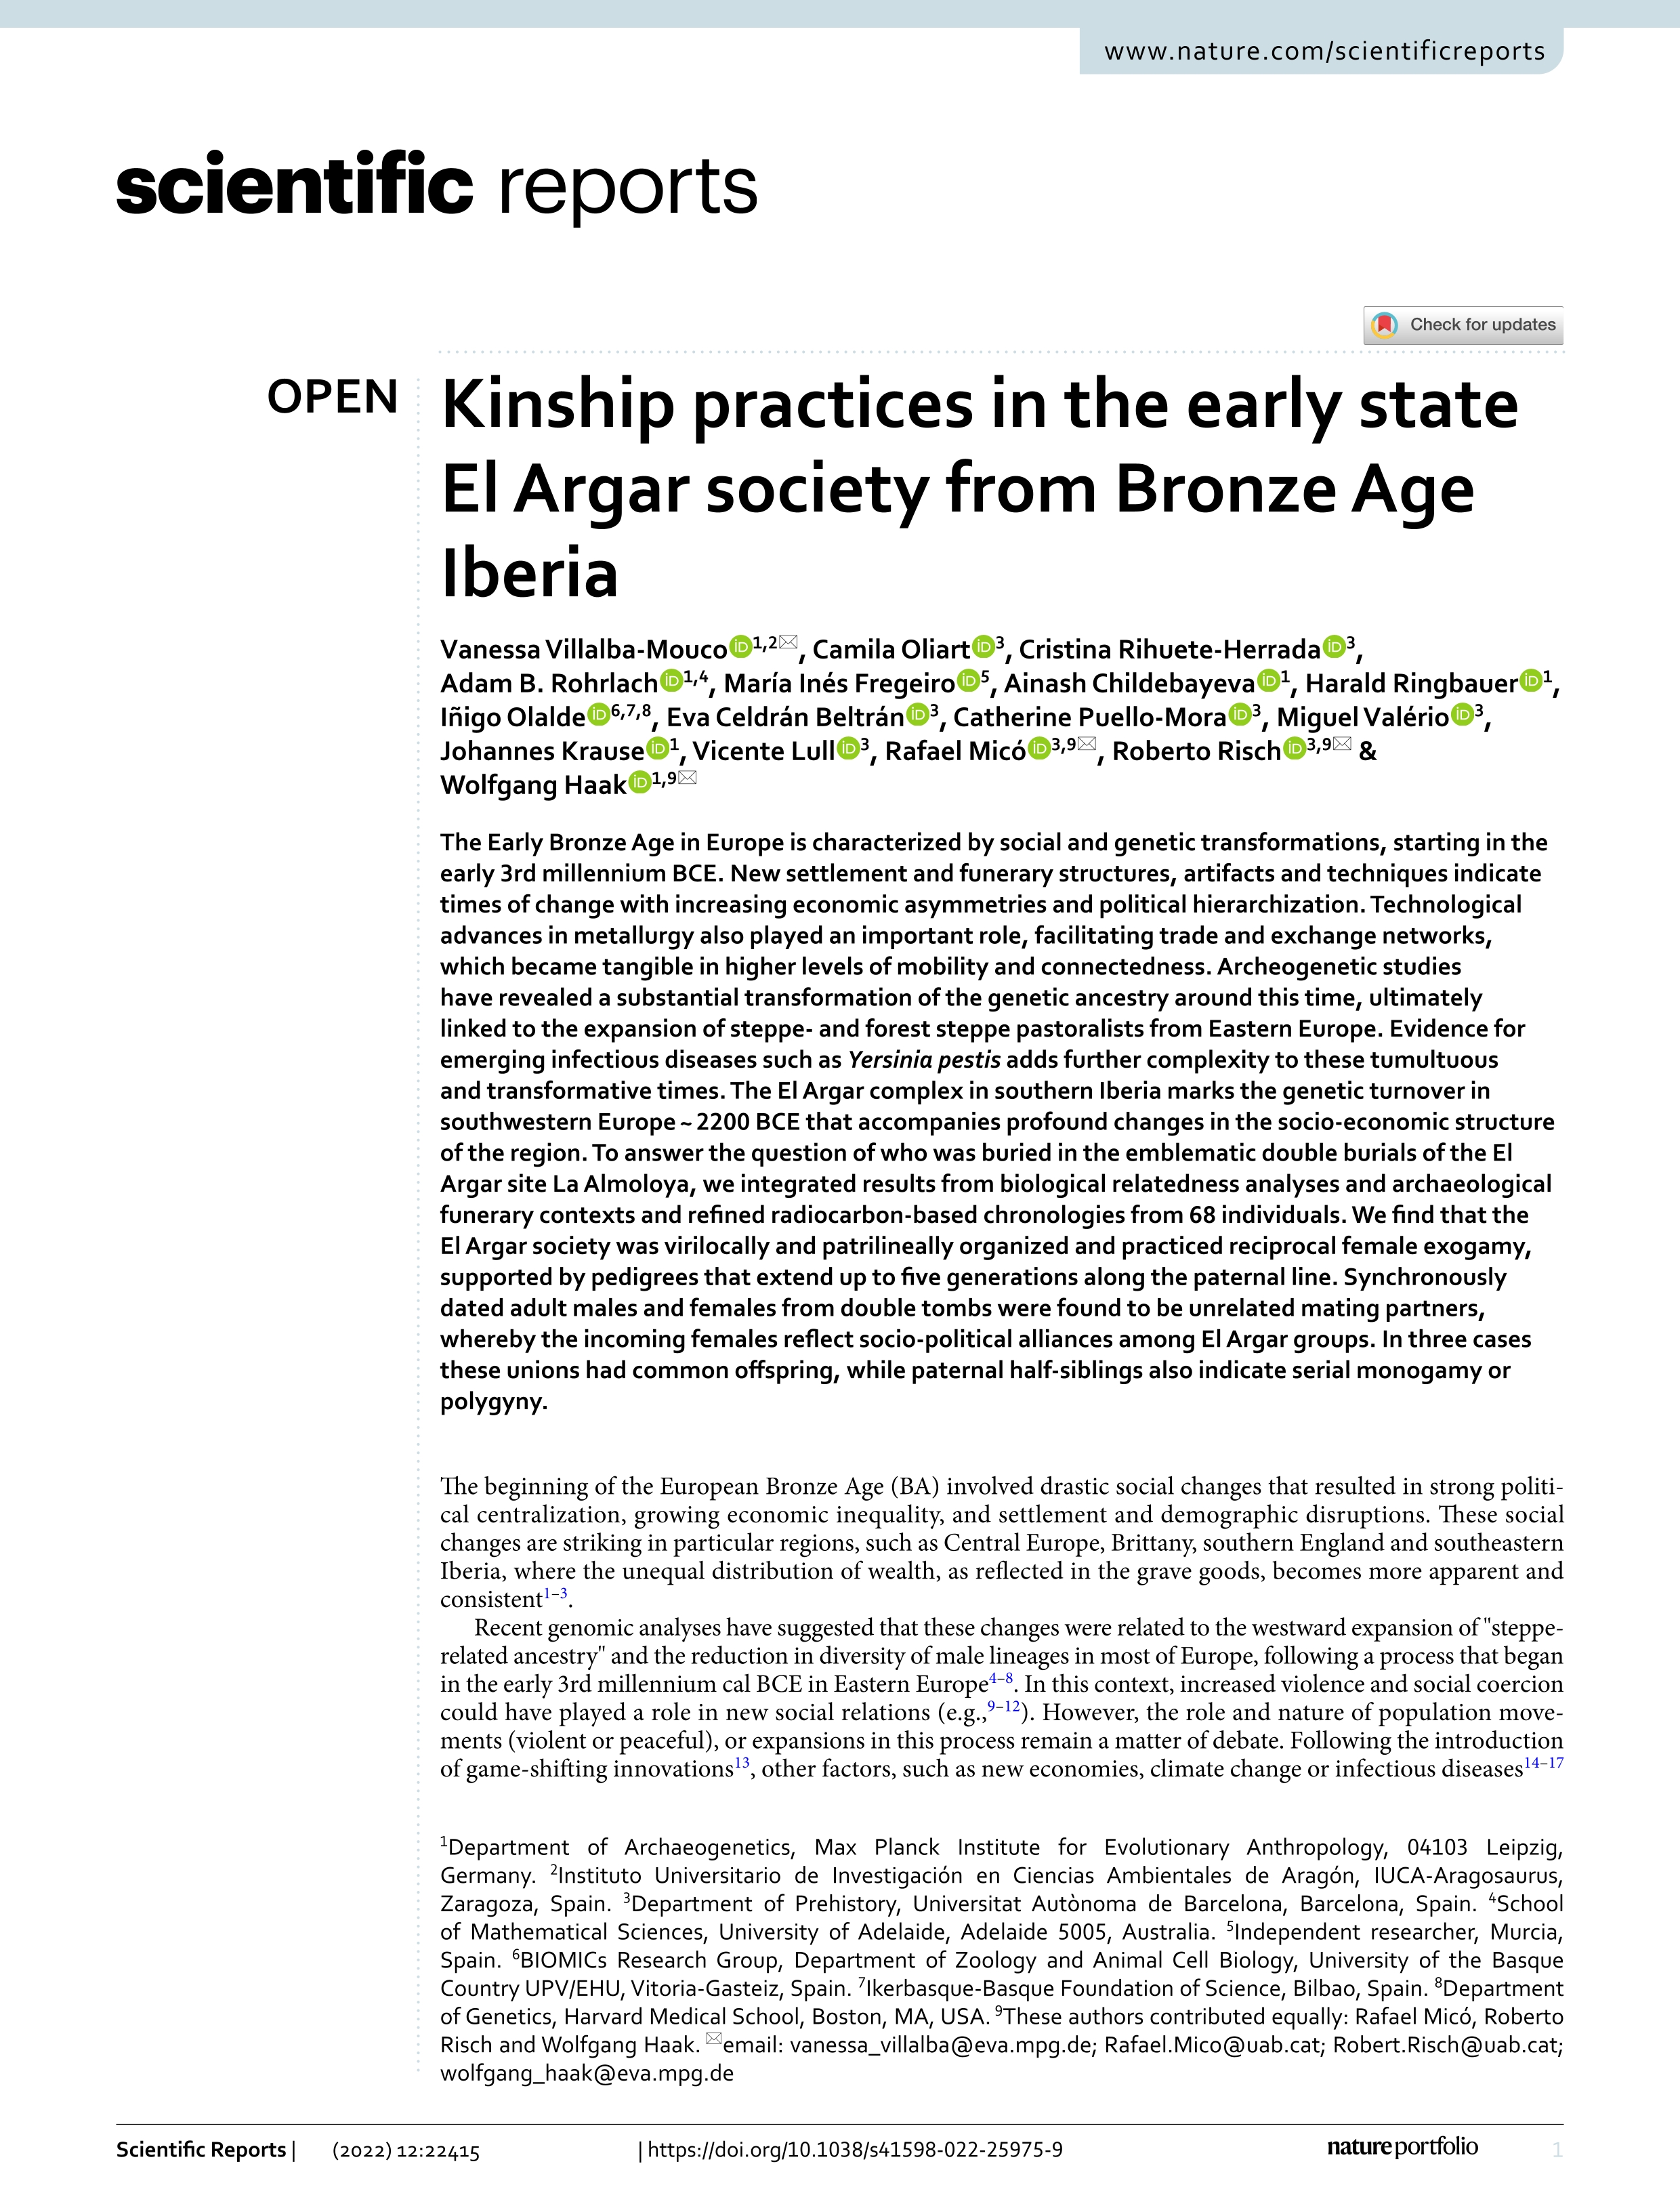 Kinship practices in the early state El Argar society from Bronze Age Iberia